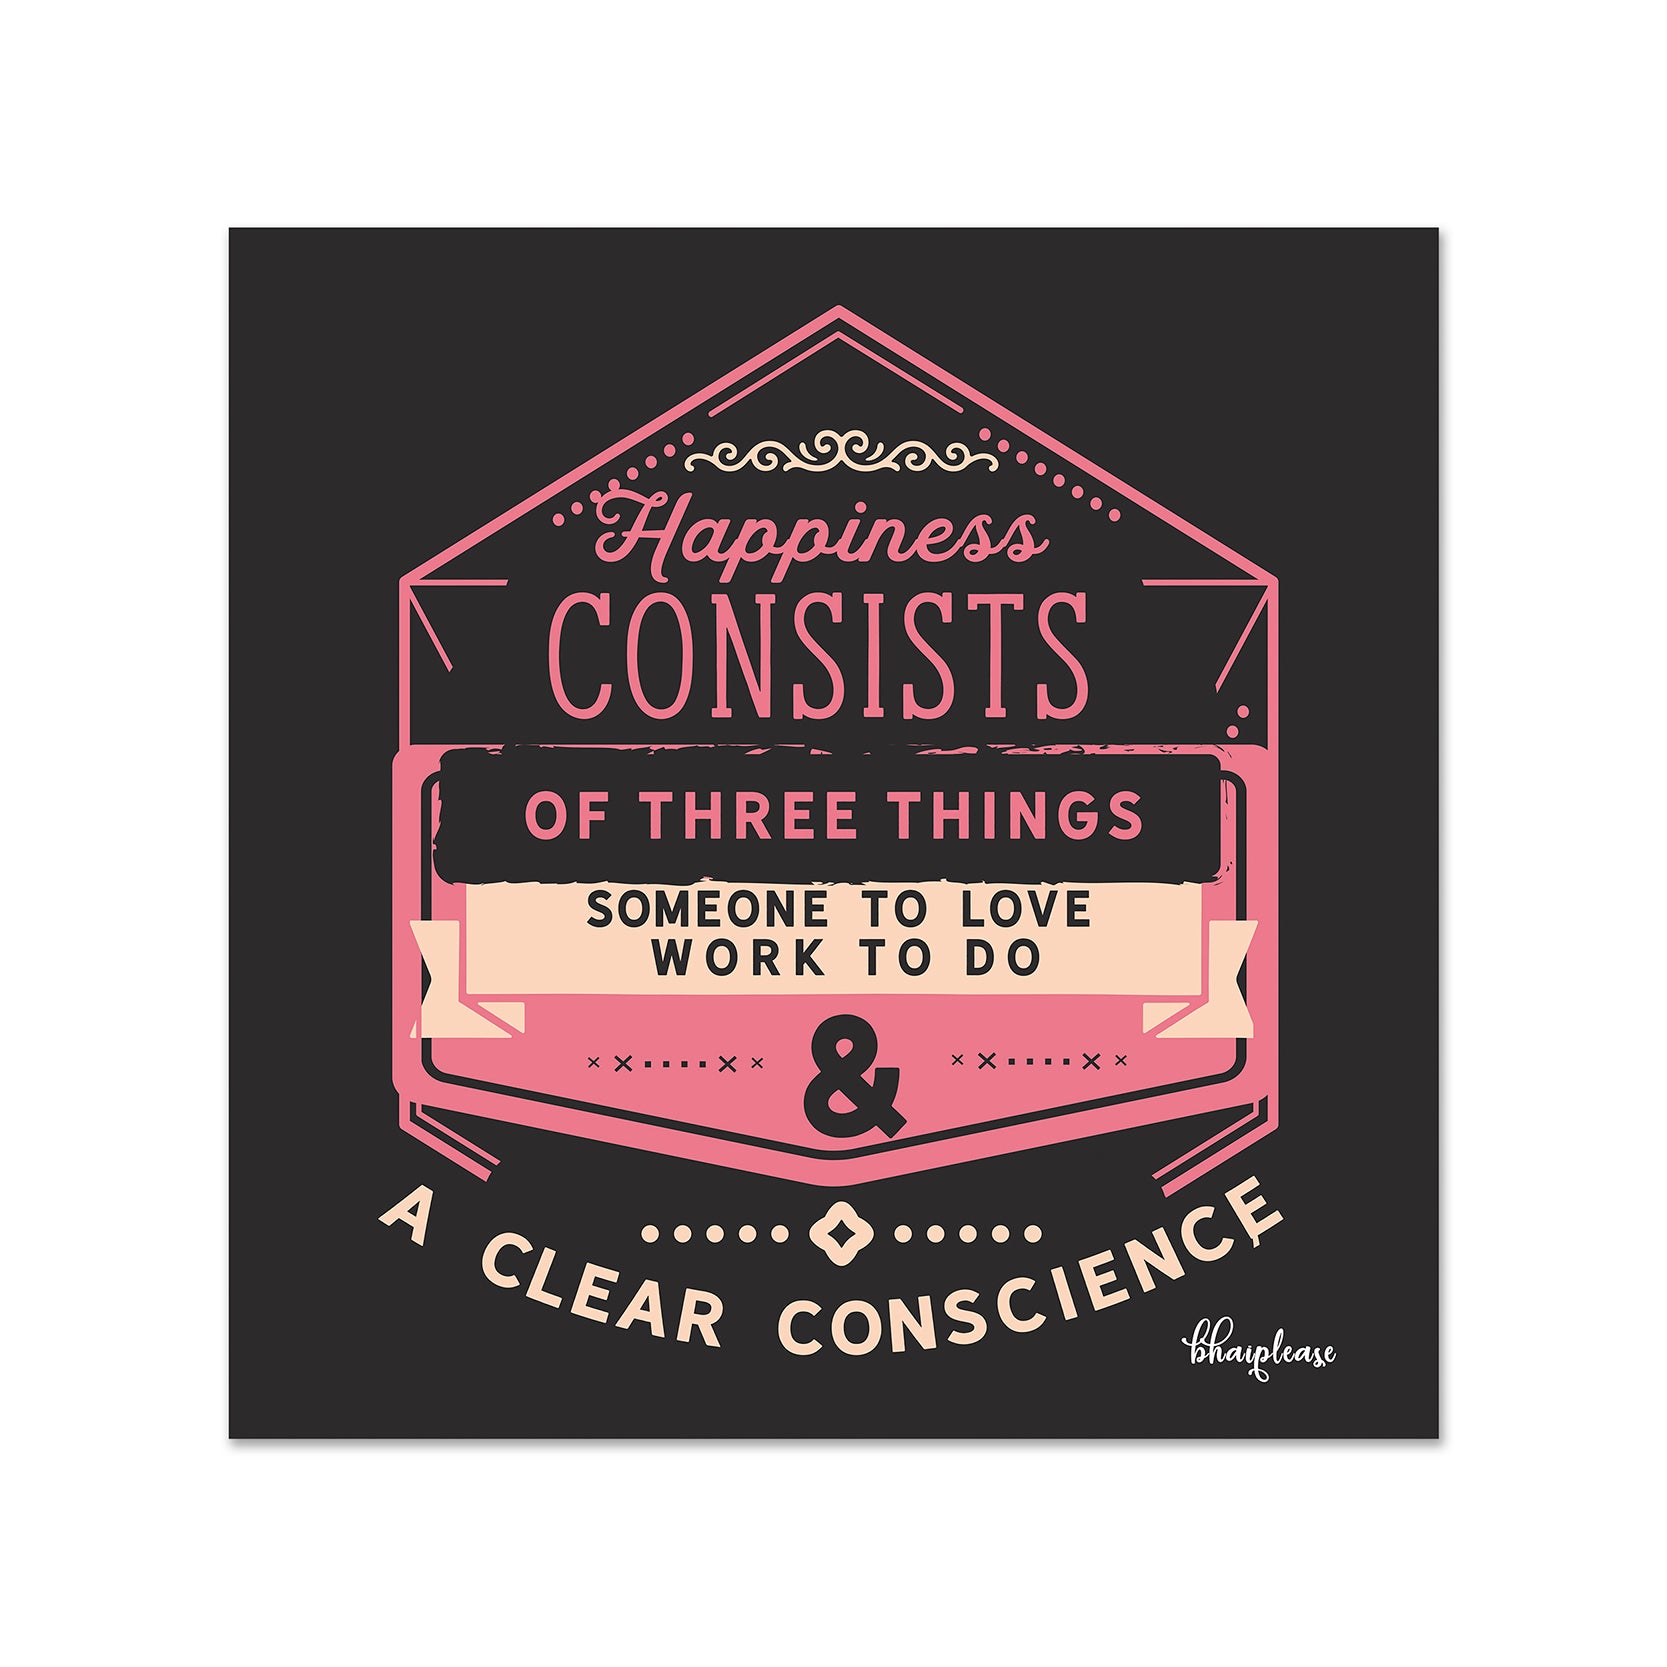 Happiness Consist of Three Things - Love, Work and Conscience Wooden Fridge / Refrigerator Magnet